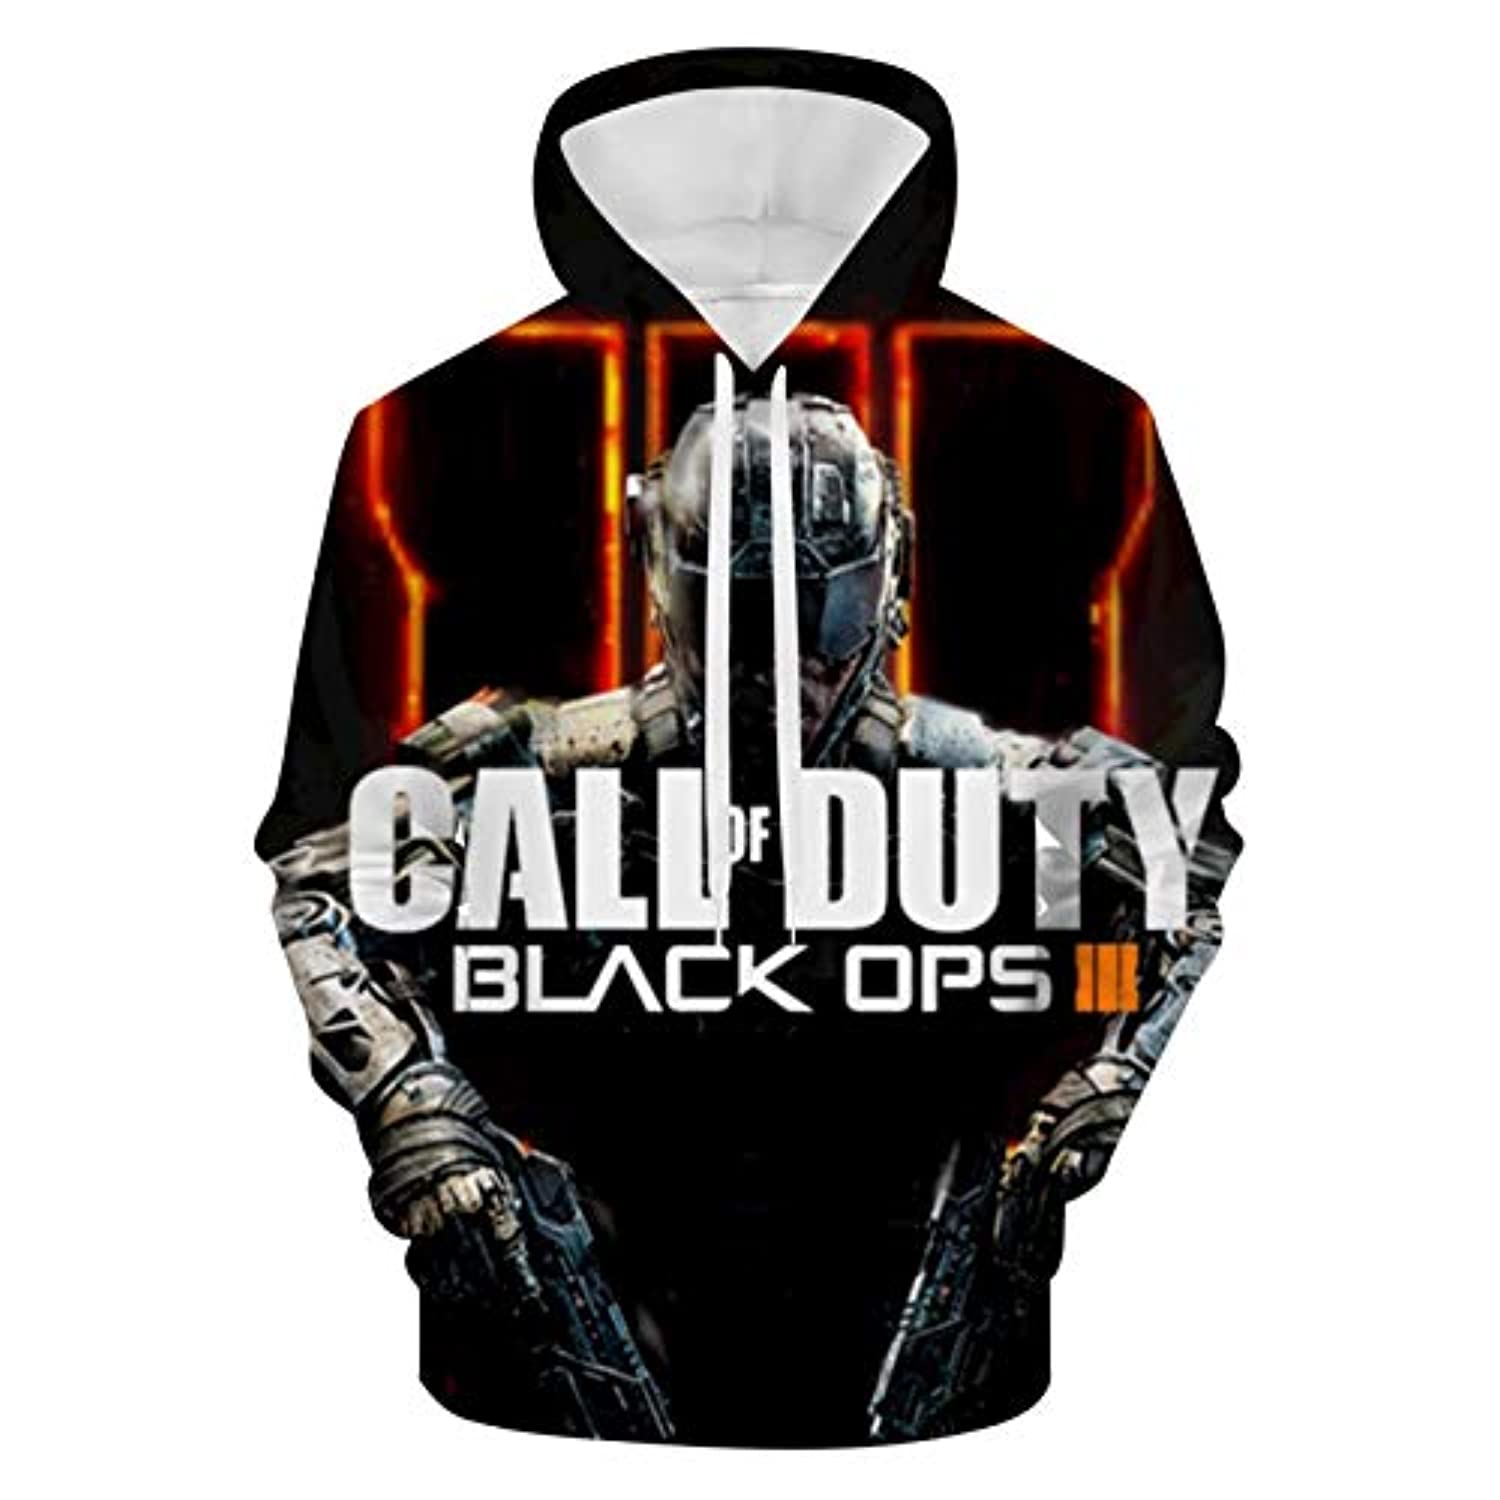 Call of Duty Hoodies – Call of Duty Black Ops 3 3D Print Hooded Drawstring Black Sweaters